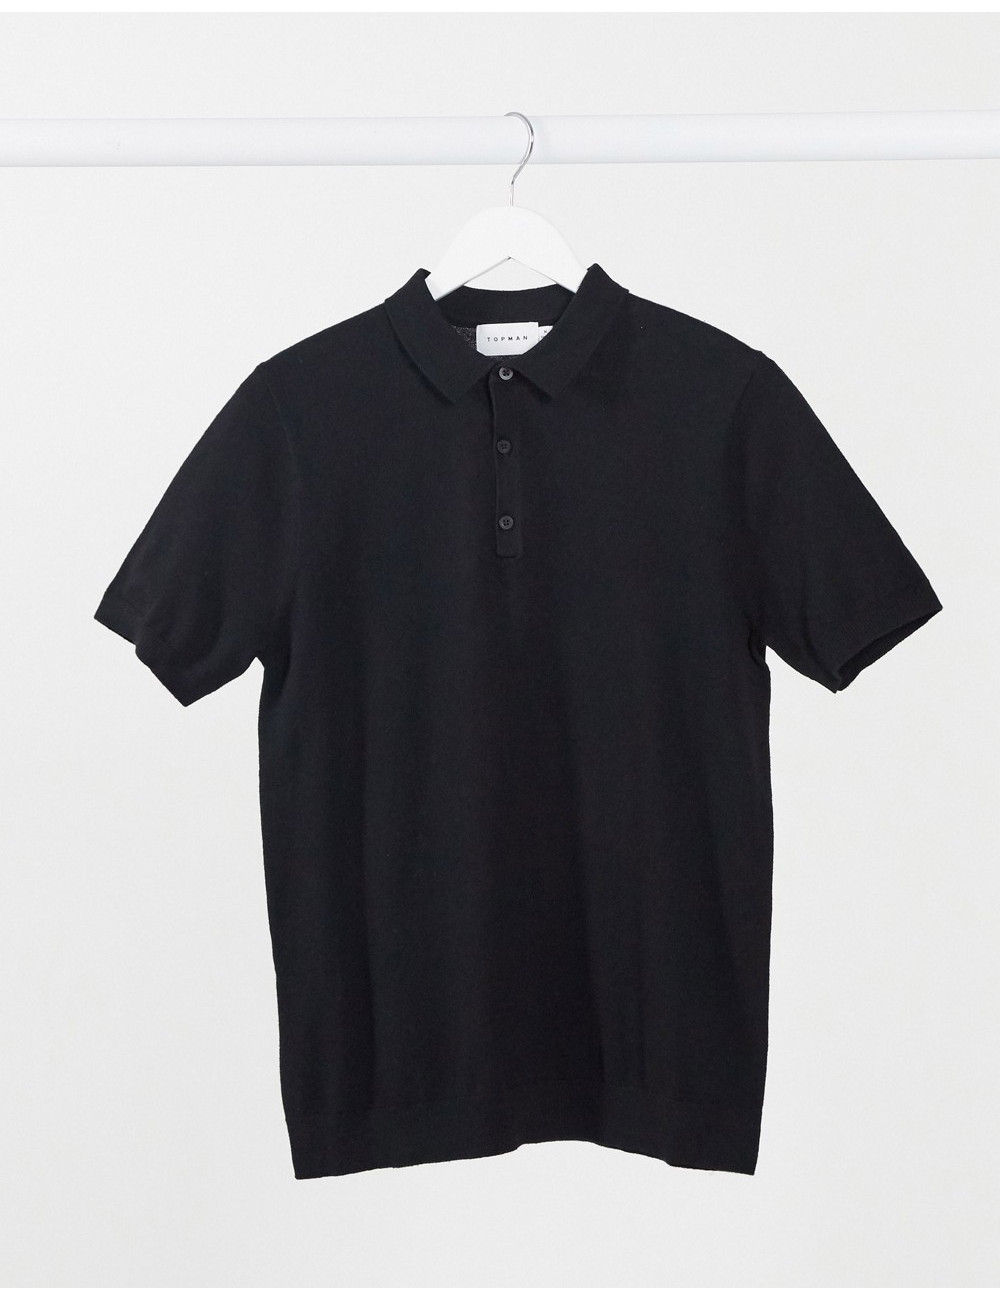 Topman knitted polo in black